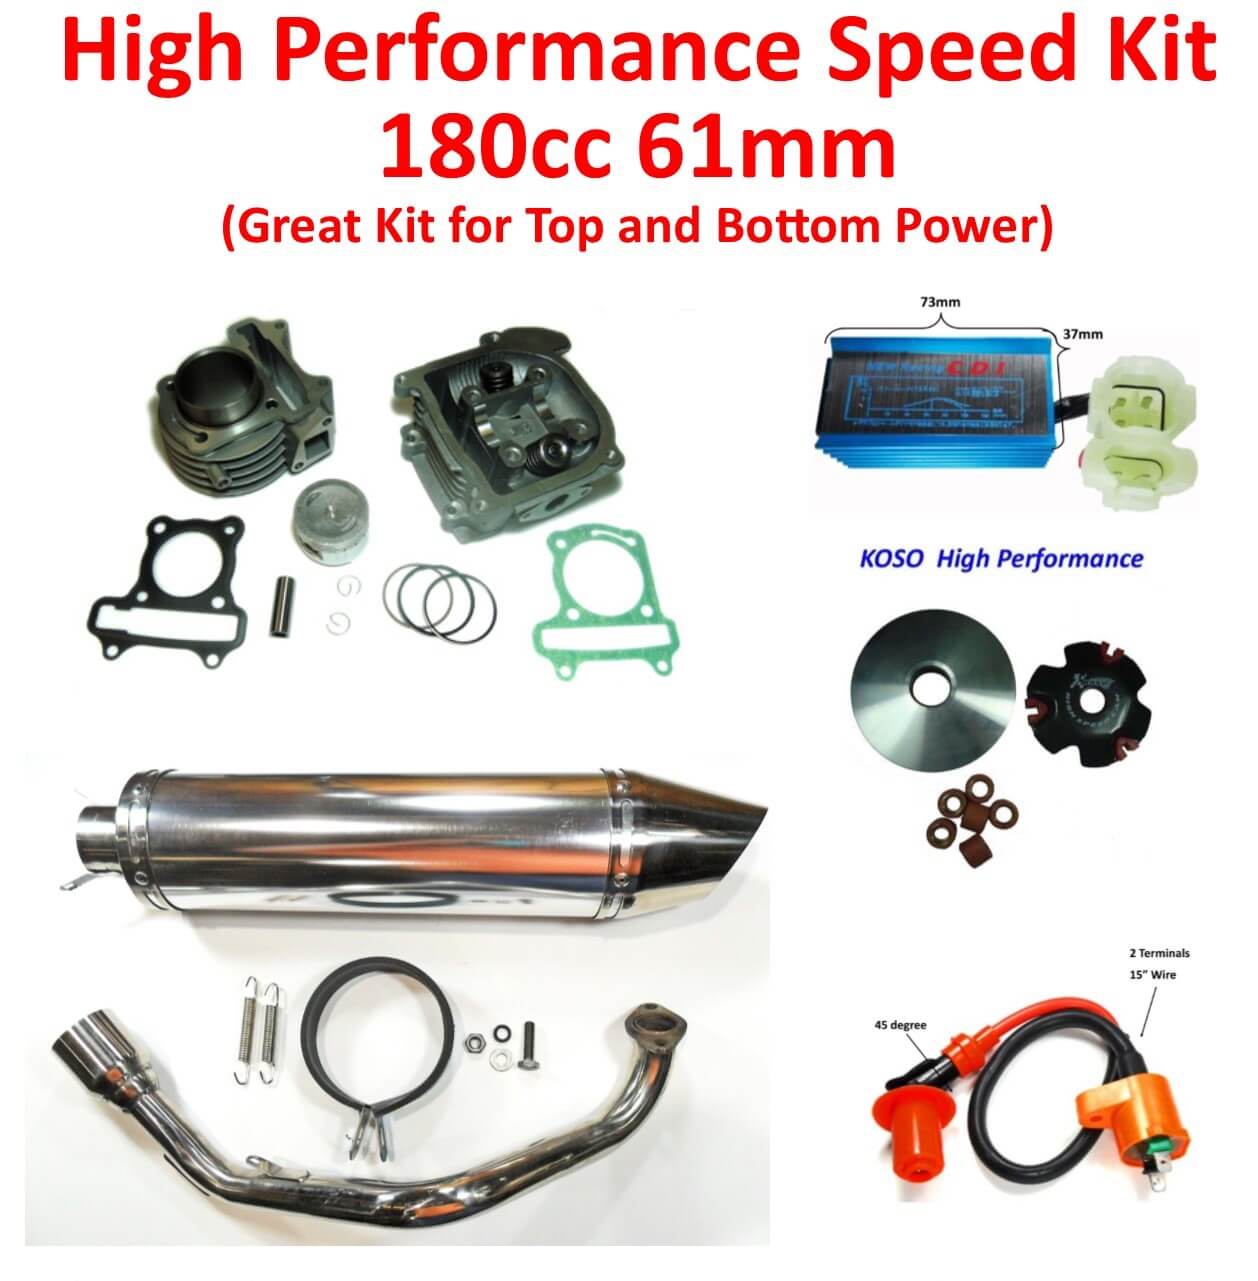 High Performance Speed Kit GY6-180cc (61mm) Comes with all parts shown. - Click Image to Close